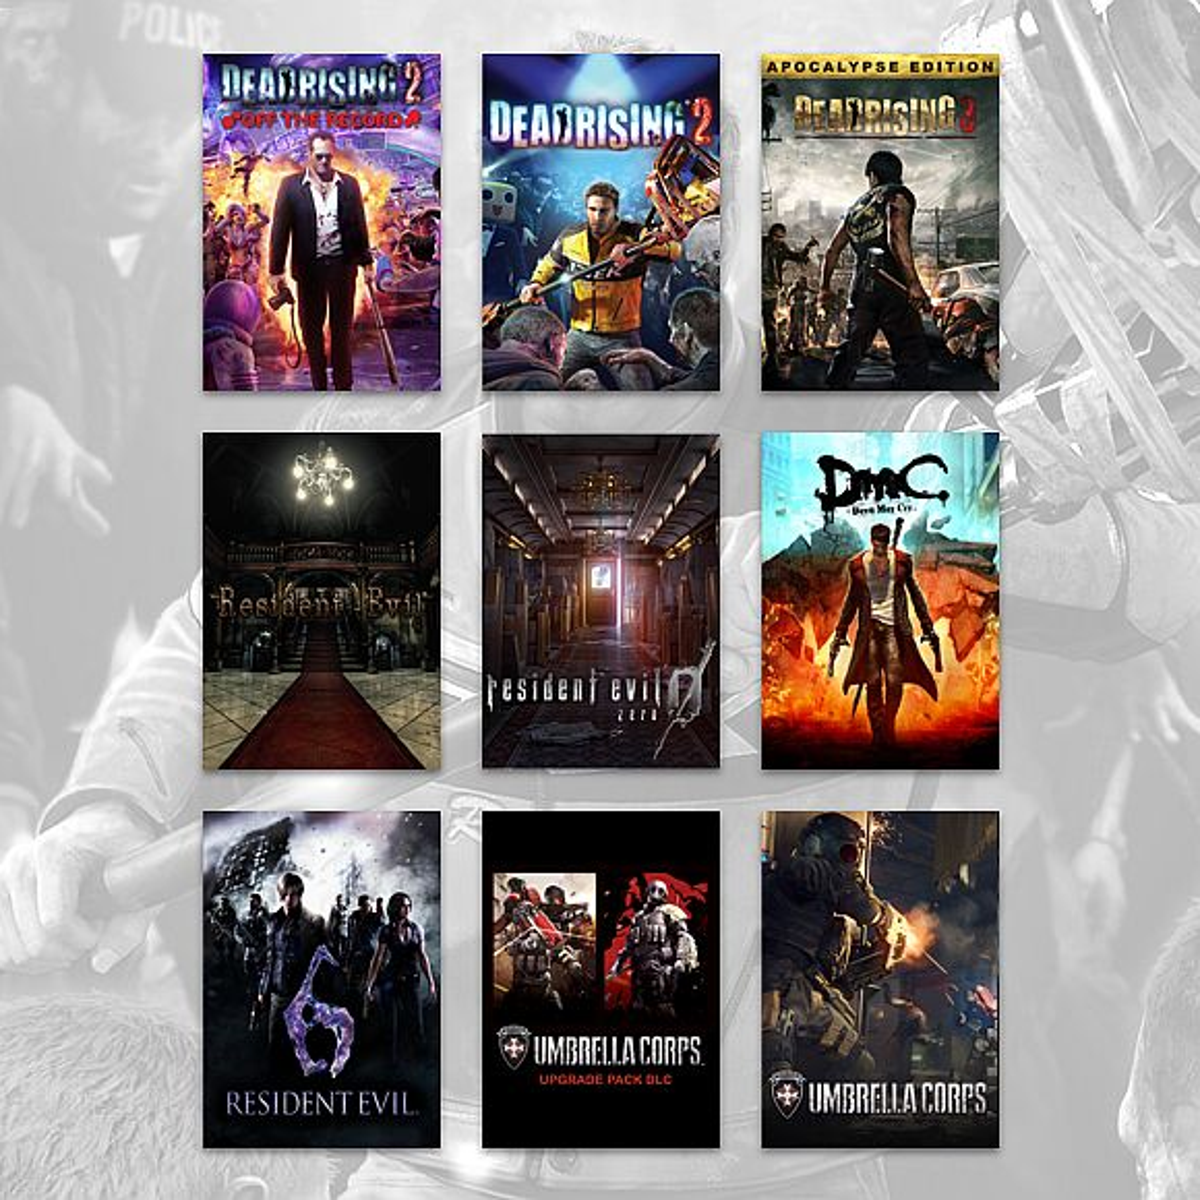 Resident Evil $30 Humble Bundle Includes 10 Games — Only $1 for Three  Titles?